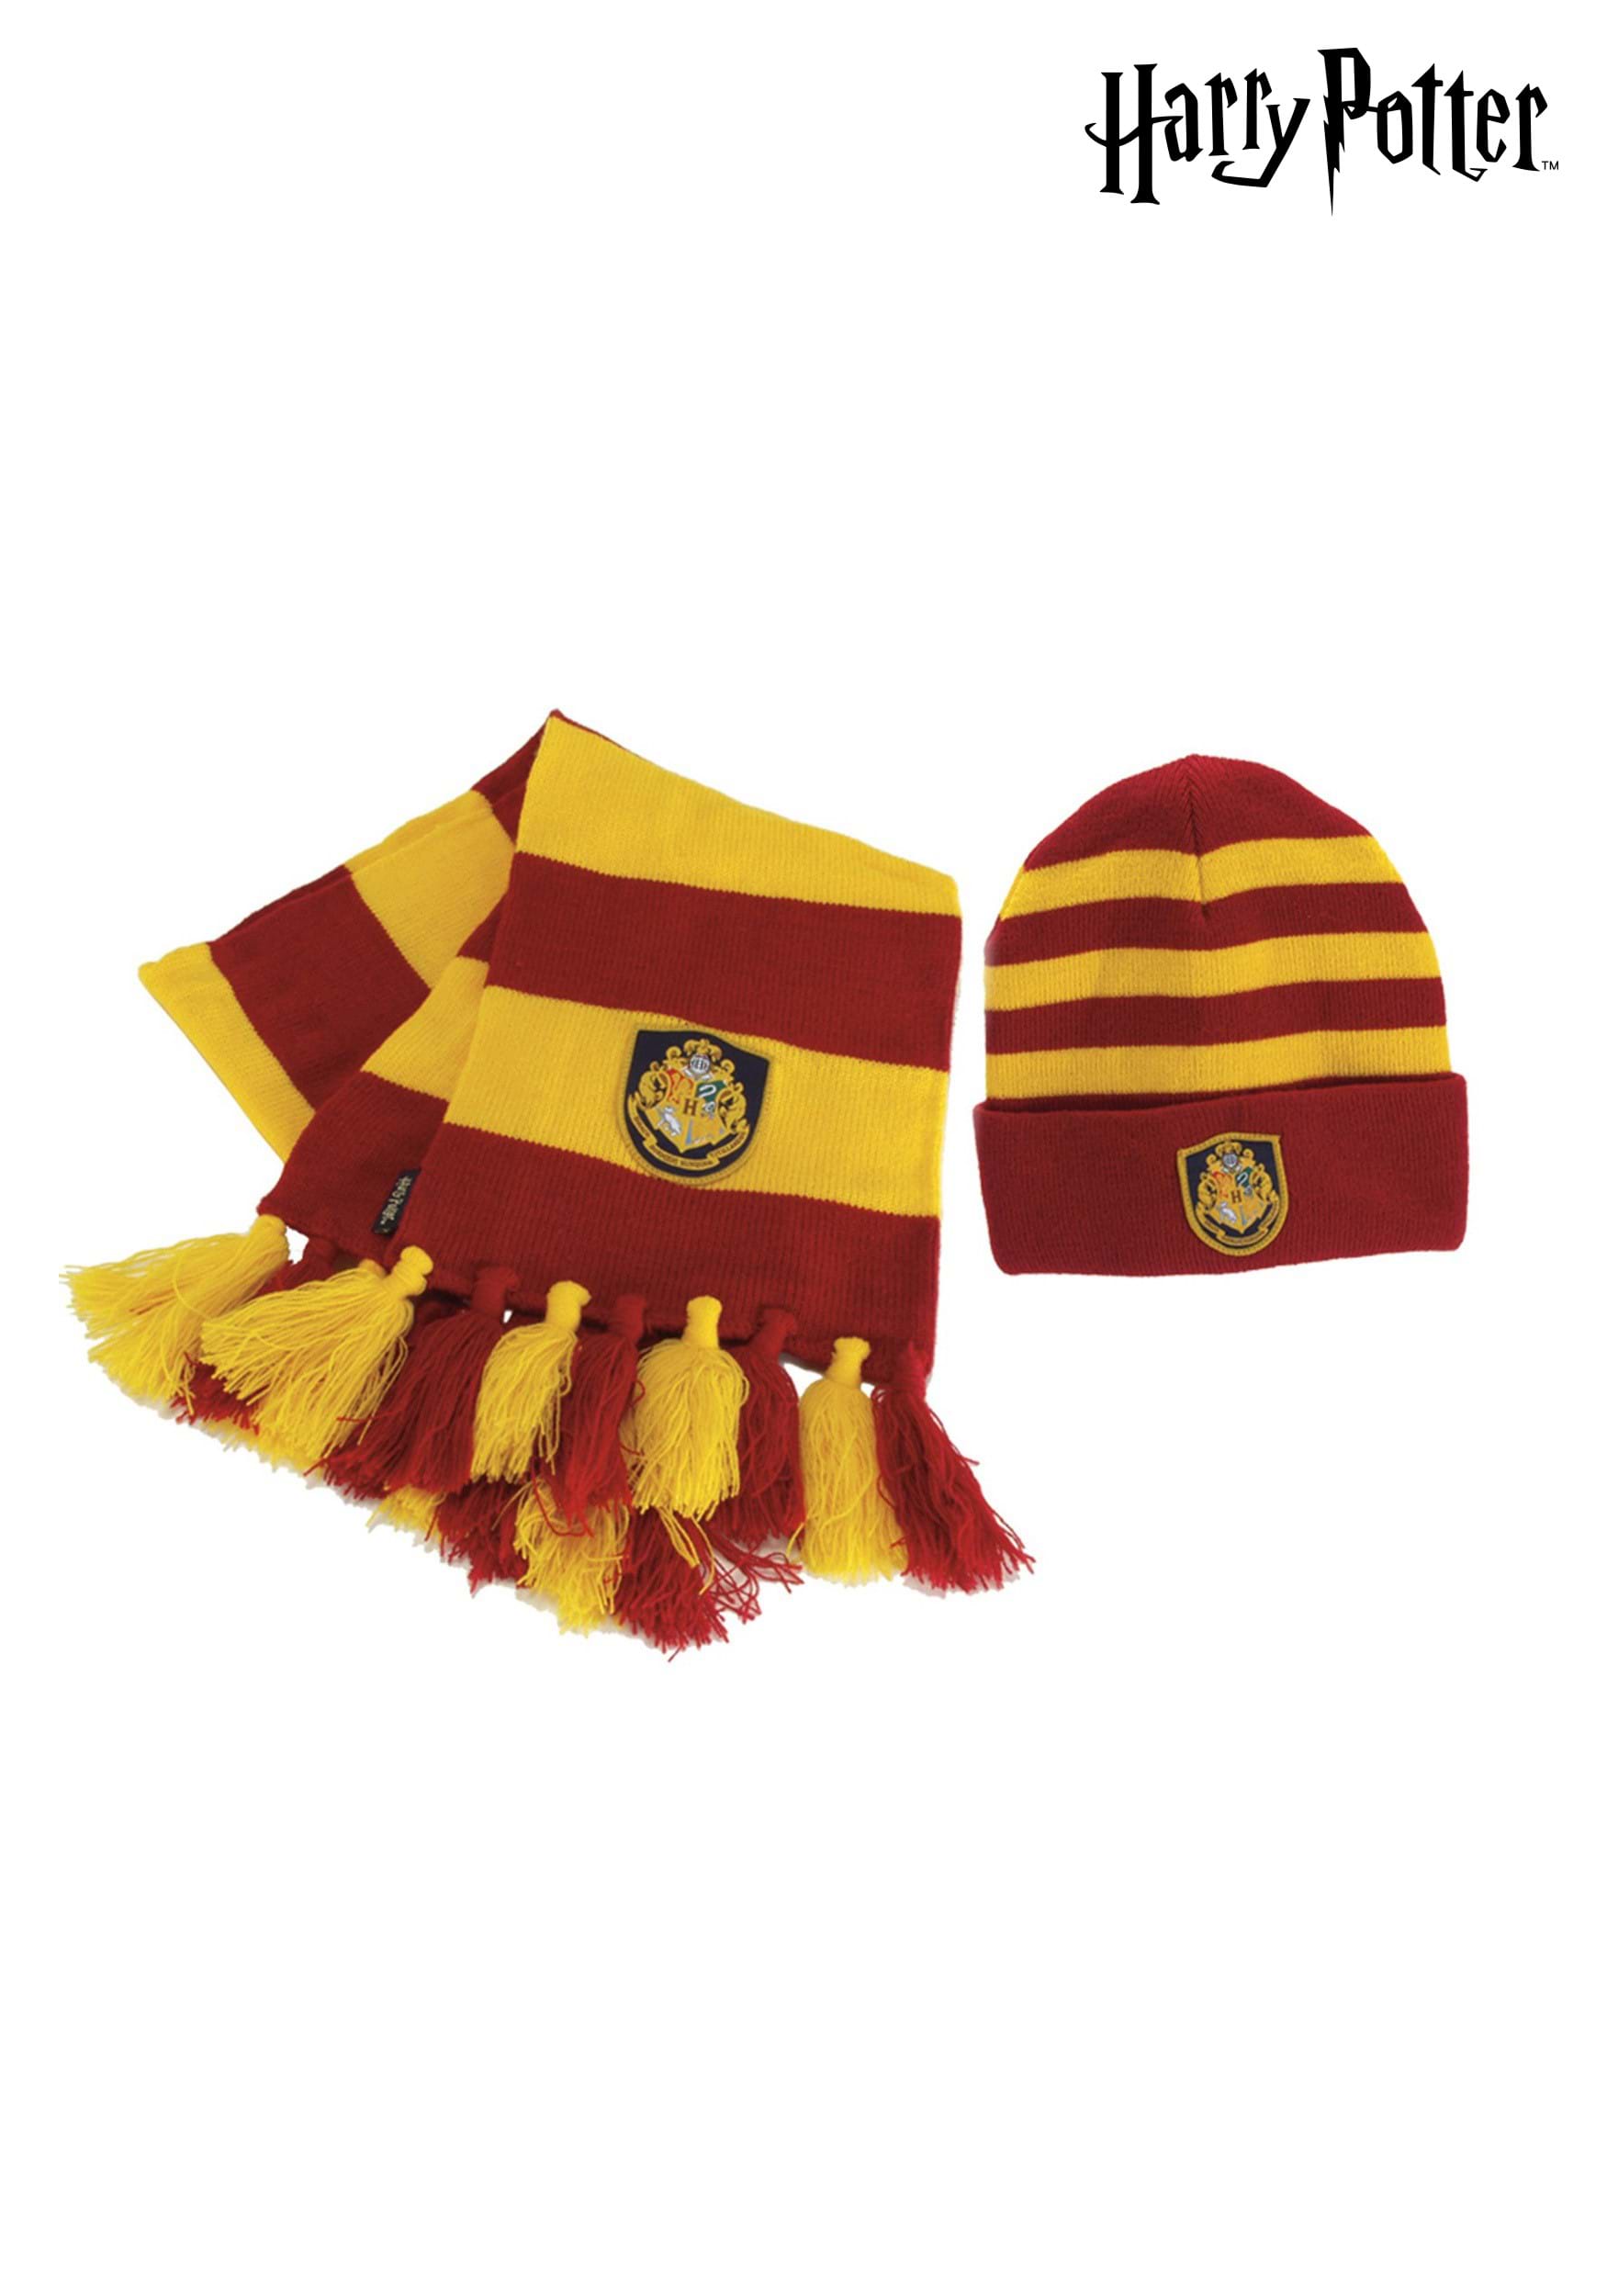 Gloves Warm Costume Xmas Gift 3pcs Harry Potter Gryffindor House Scarf+Cap/Hat 